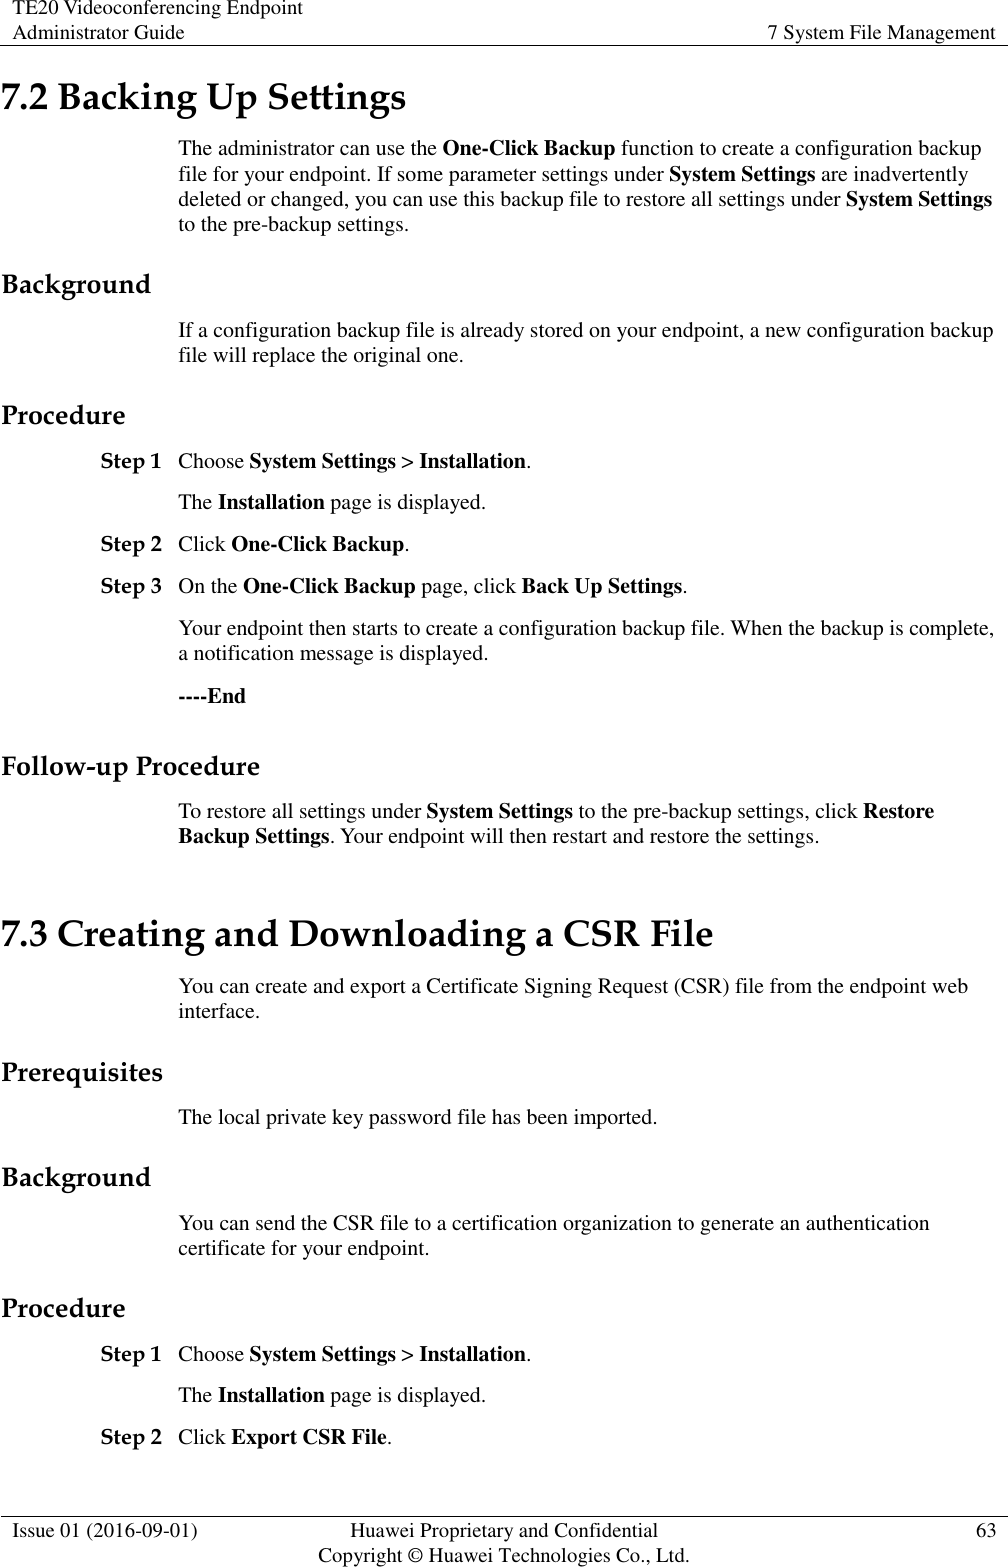 TE20 Videoconferencing Endpoint Administrator Guide 7 System File Management  Issue 01 (2016-09-01) Huawei Proprietary and Confidential                                     Copyright © Huawei Technologies Co., Ltd. 63  7.2 Backing Up Settings The administrator can use the One-Click Backup function to create a configuration backup file for your endpoint. If some parameter settings under System Settings are inadvertently deleted or changed, you can use this backup file to restore all settings under System Settings to the pre-backup settings. Background If a configuration backup file is already stored on your endpoint, a new configuration backup file will replace the original one. Procedure Step 1 Choose System Settings &gt; Installation. The Installation page is displayed. Step 2 Click One-Click Backup. Step 3 On the One-Click Backup page, click Back Up Settings. Your endpoint then starts to create a configuration backup file. When the backup is complete, a notification message is displayed. ----End Follow-up Procedure To restore all settings under System Settings to the pre-backup settings, click Restore Backup Settings. Your endpoint will then restart and restore the settings. 7.3 Creating and Downloading a CSR File You can create and export a Certificate Signing Request (CSR) file from the endpoint web interface. Prerequisites The local private key password file has been imported. Background You can send the CSR file to a certification organization to generate an authentication certificate for your endpoint. Procedure Step 1 Choose System Settings &gt; Installation. The Installation page is displayed. Step 2 Click Export CSR File. 